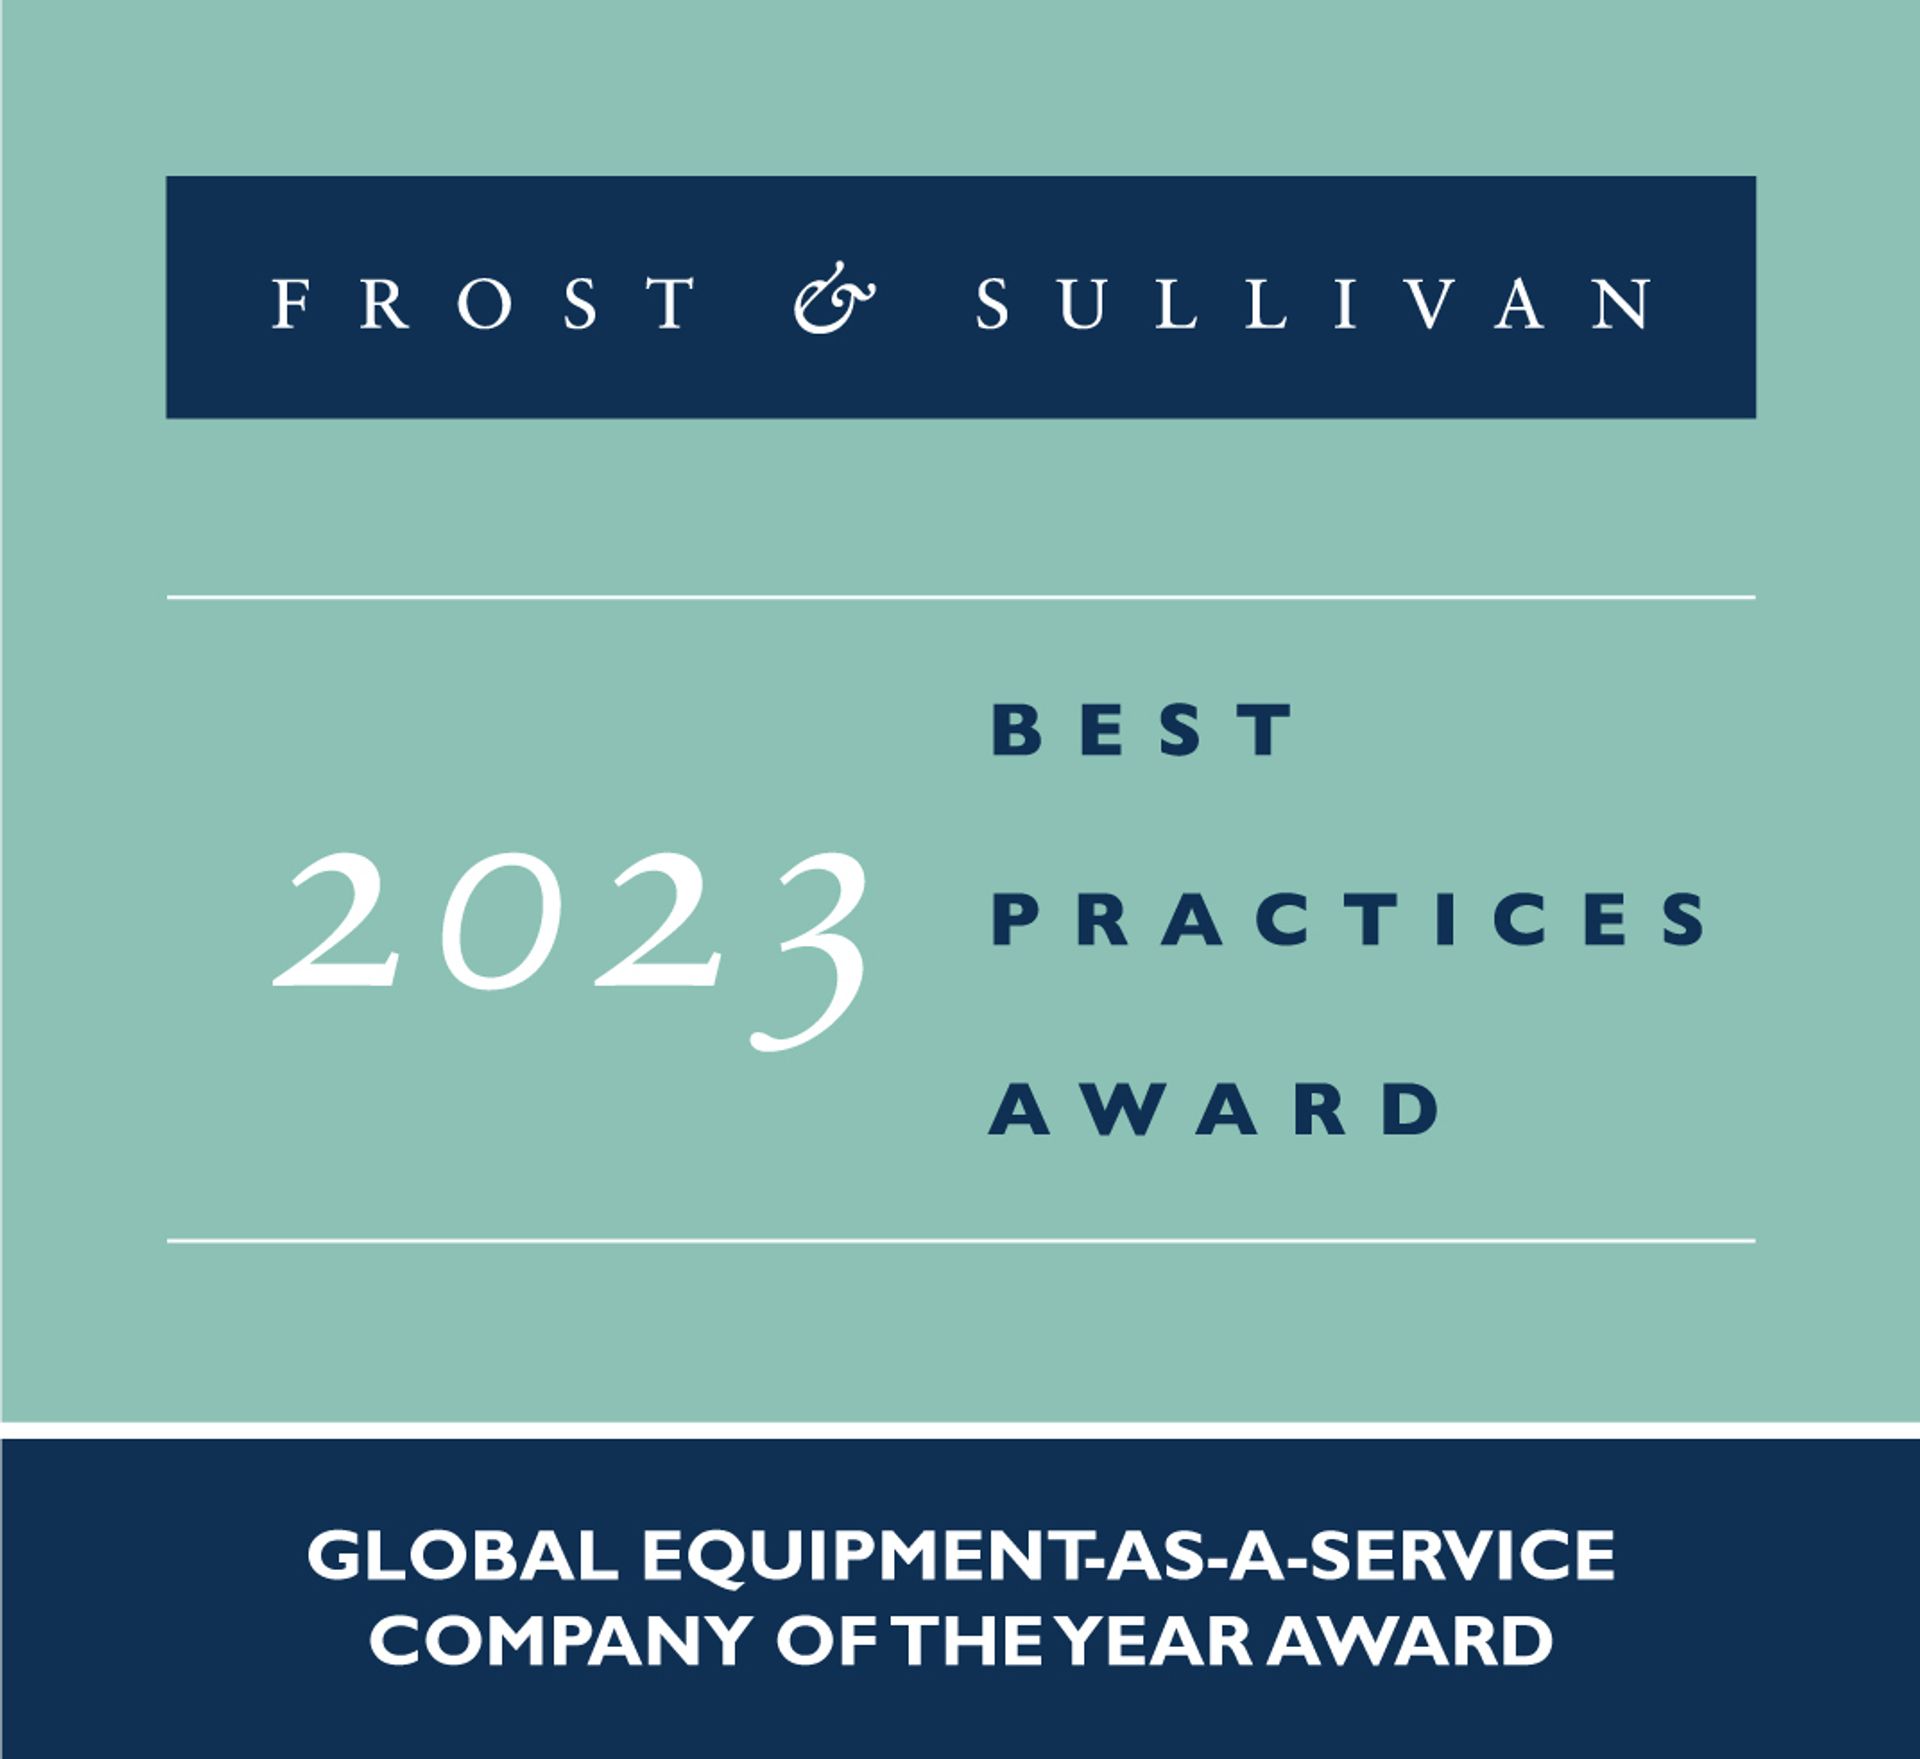 Relayr receives Global Equipment-as-a-Service Company of the Year Award from Frost & Sullivan